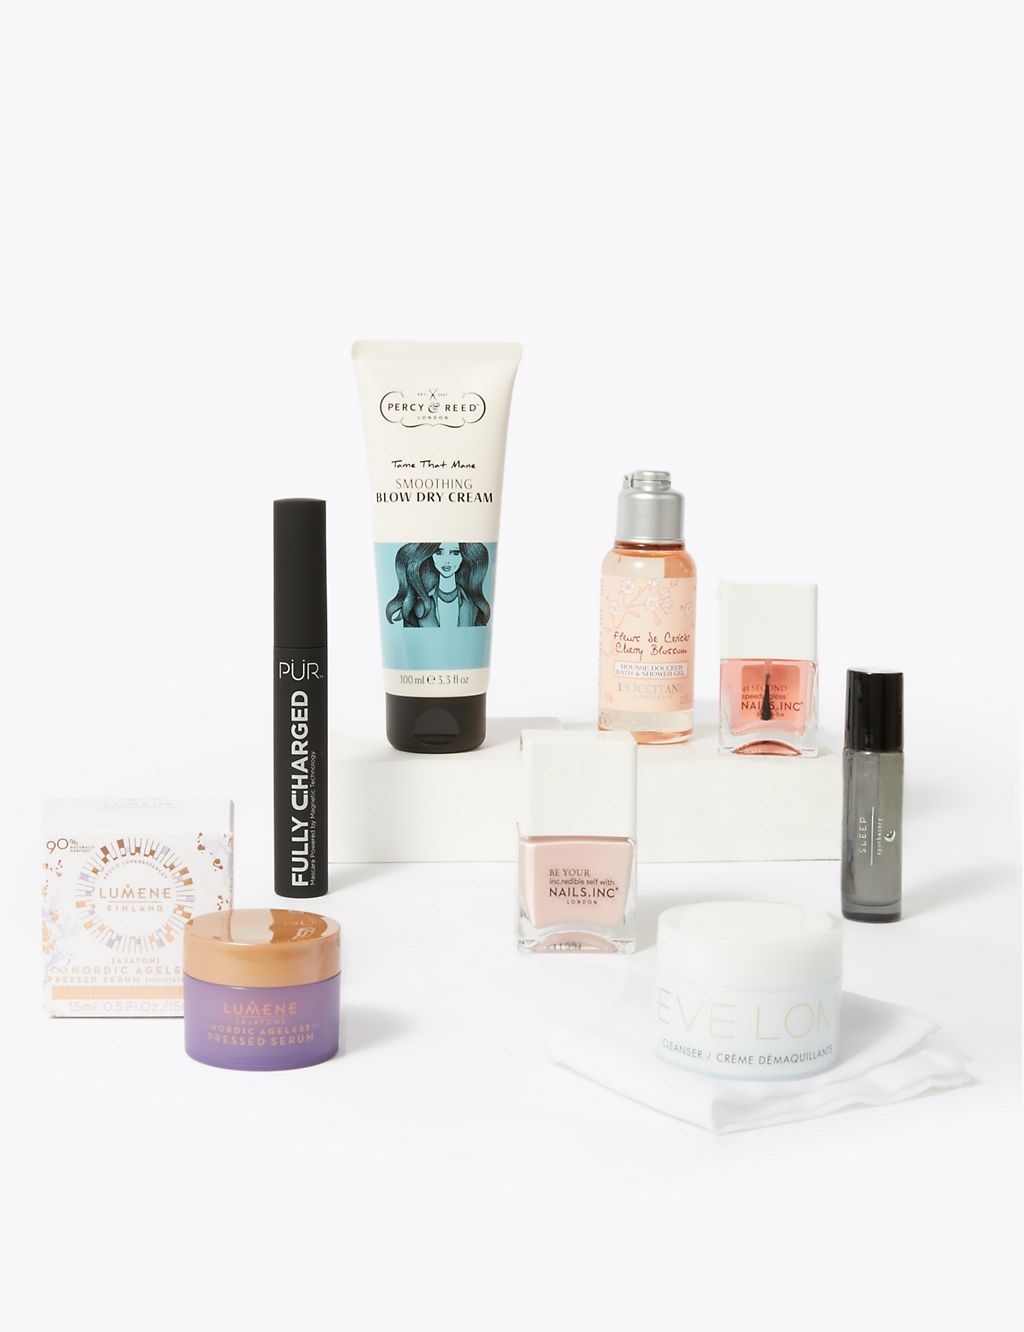 Beauty box for the mum in your life - worth £100 1 of 4